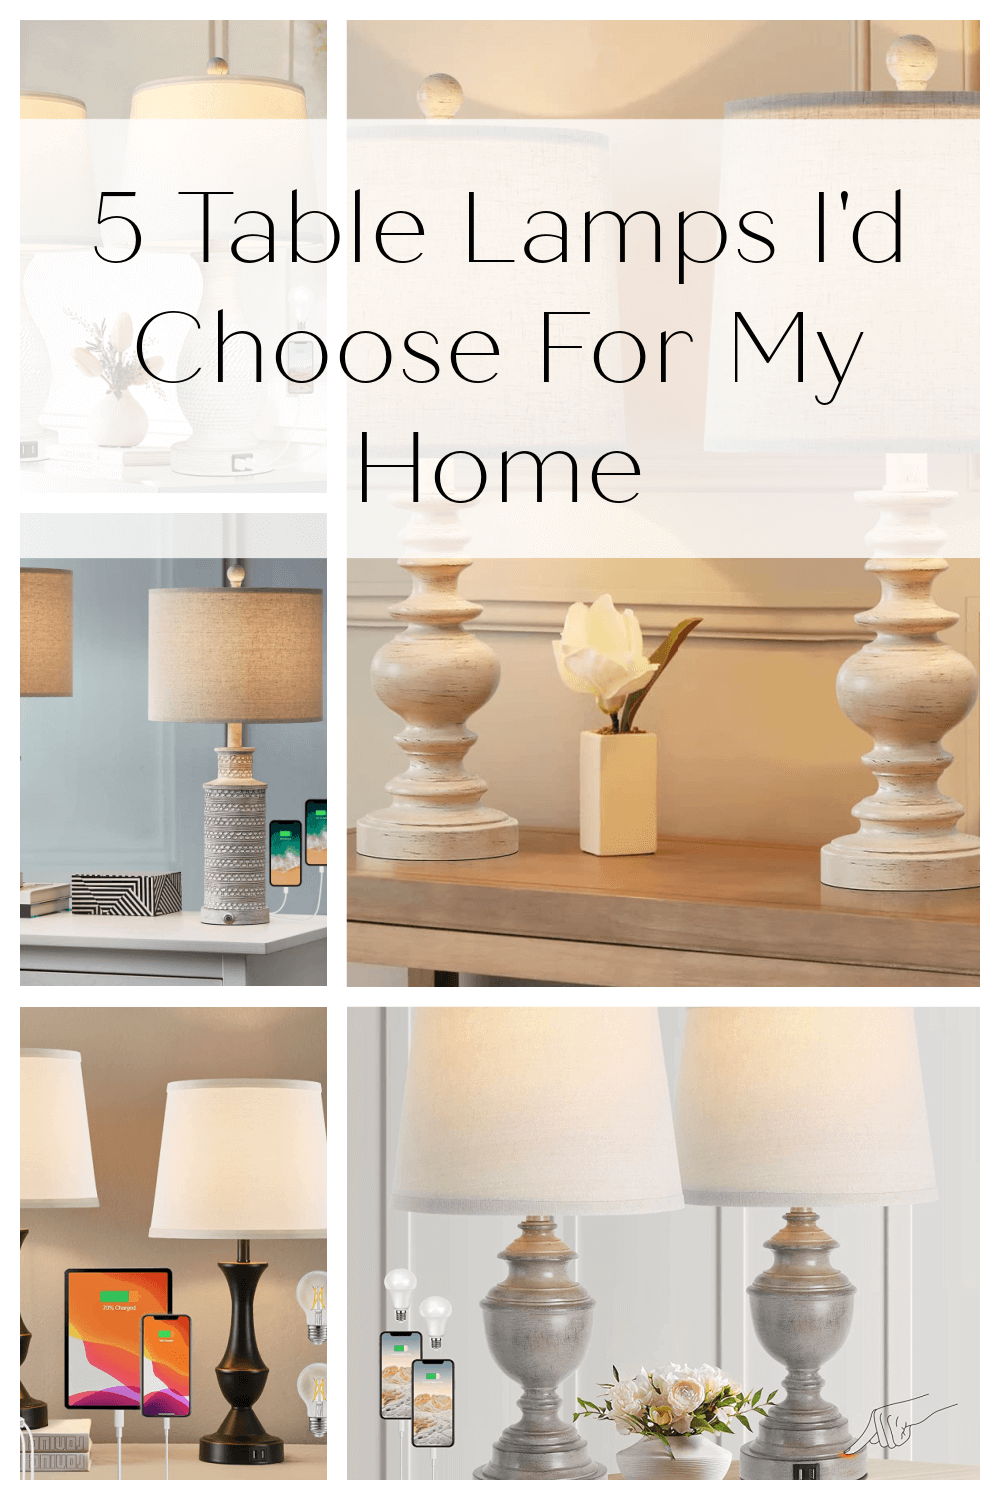 5 Table Lamps I’d Choose For My Home